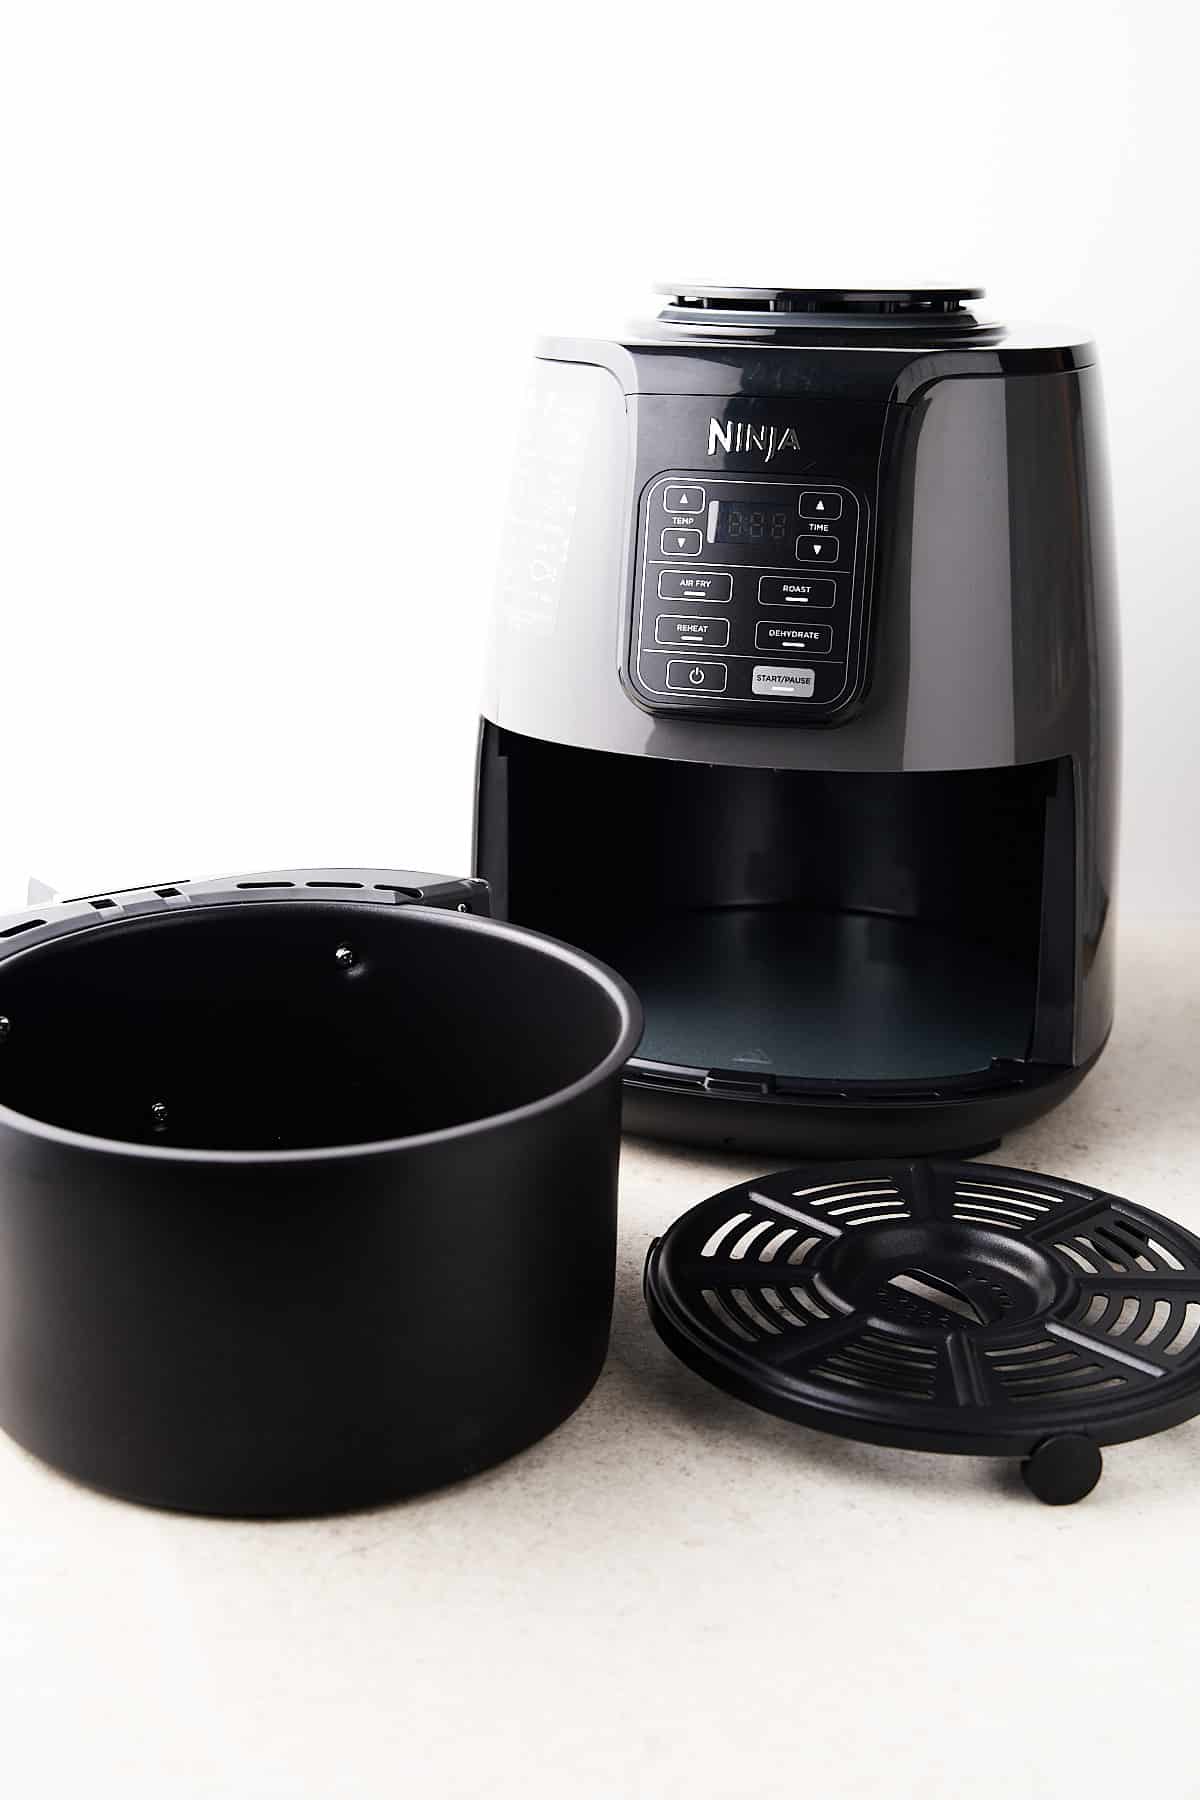 How to use an air fryer.